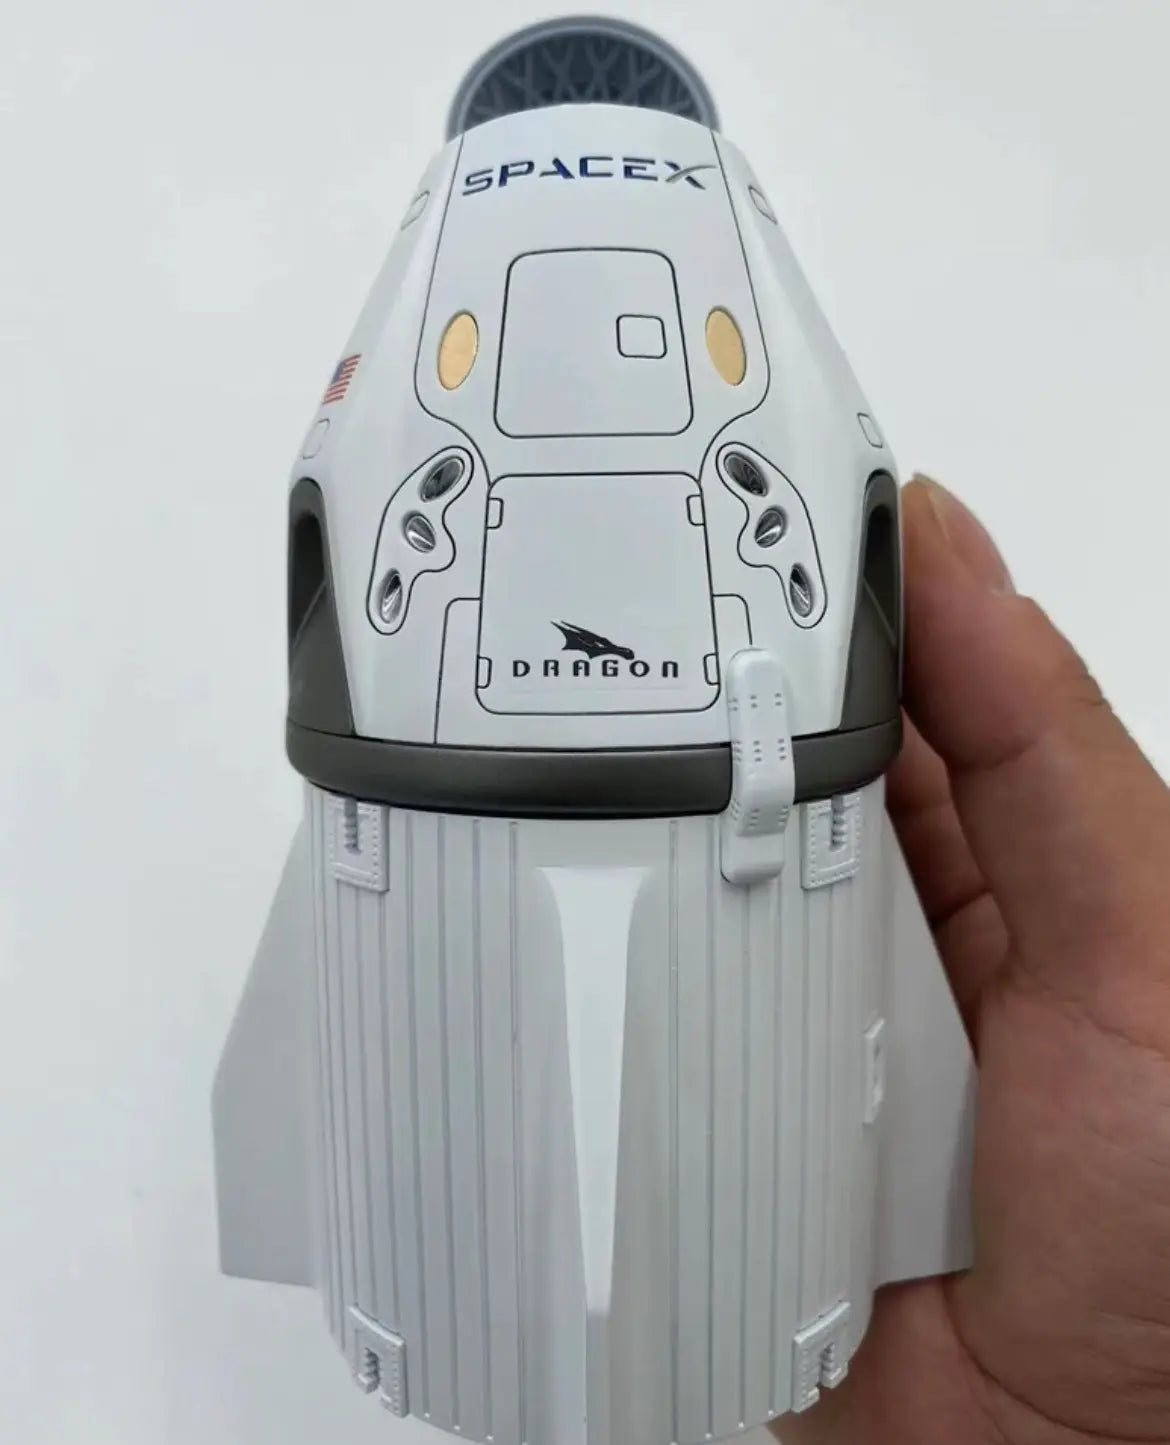 CrewDragon 1:55 model in hand, with open nose cone